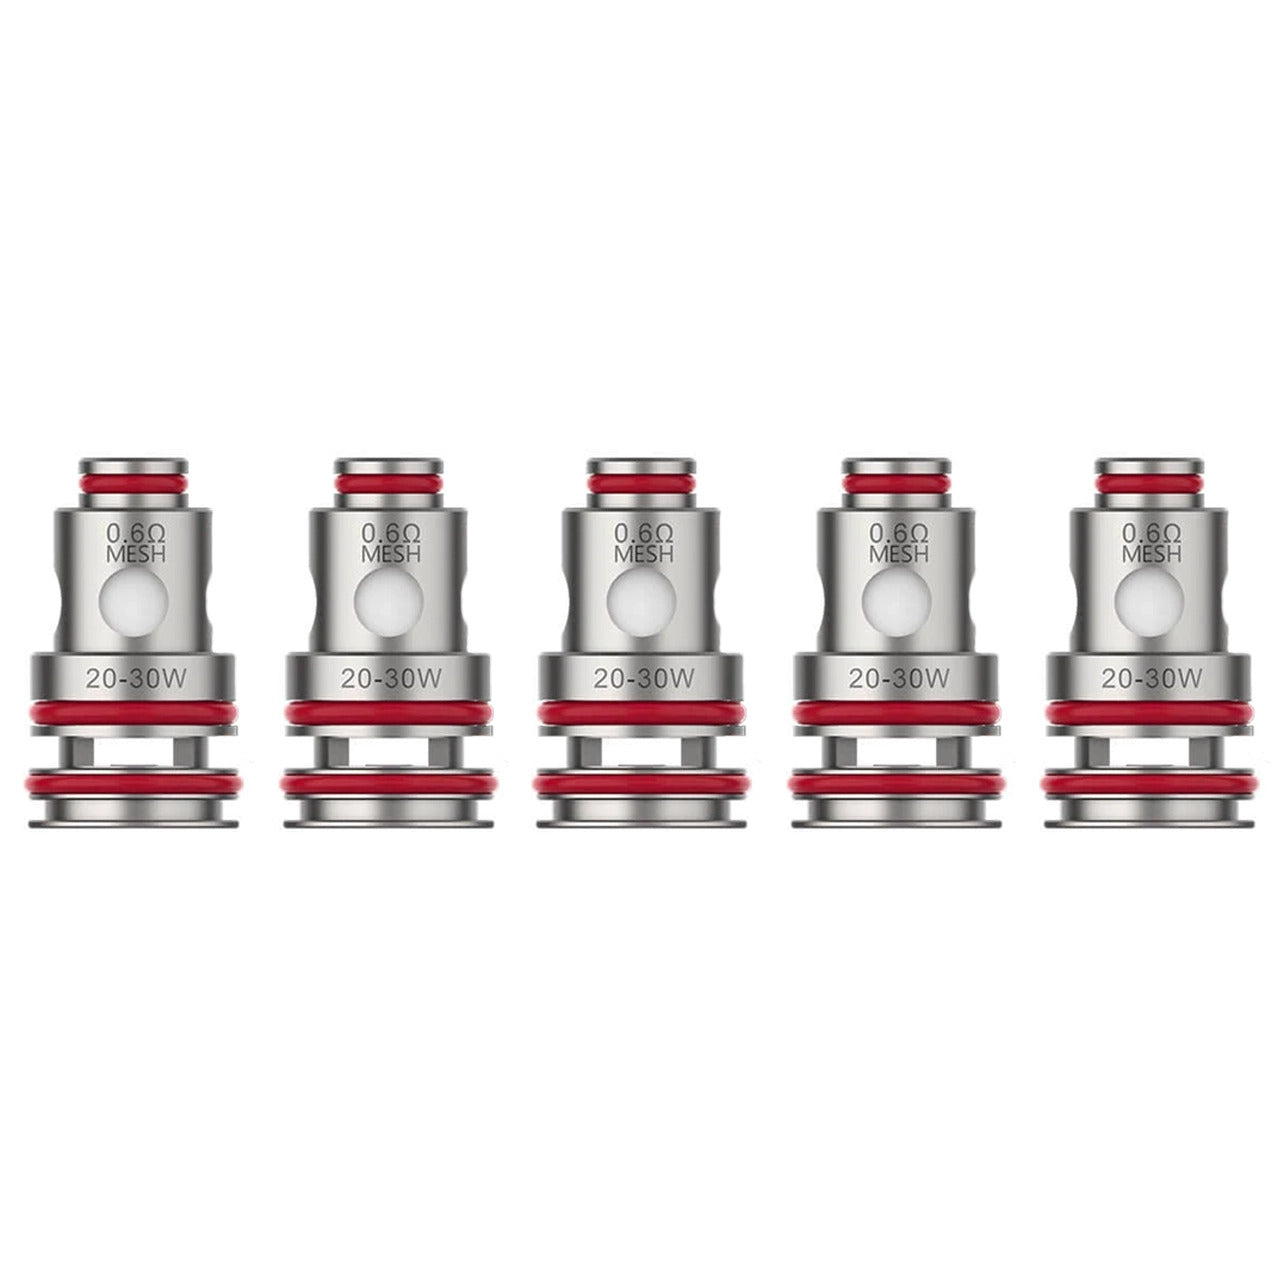 Vaporesso - GTX Mesh Replacement Coils - Pack of 5